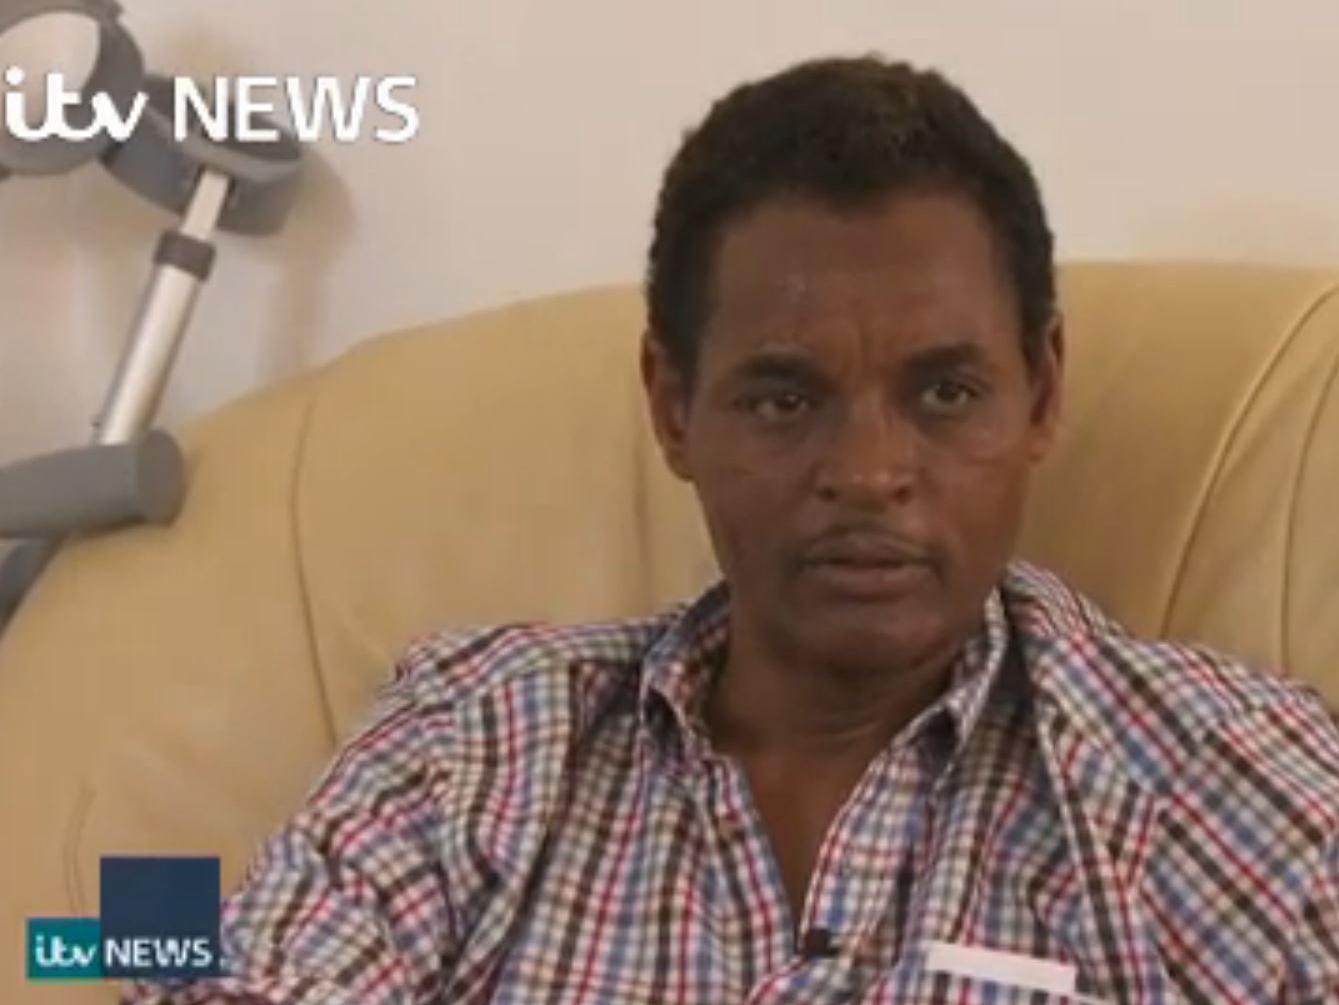 Finsbury Park victim Yassin Hersi described the scene in the moments after the attack